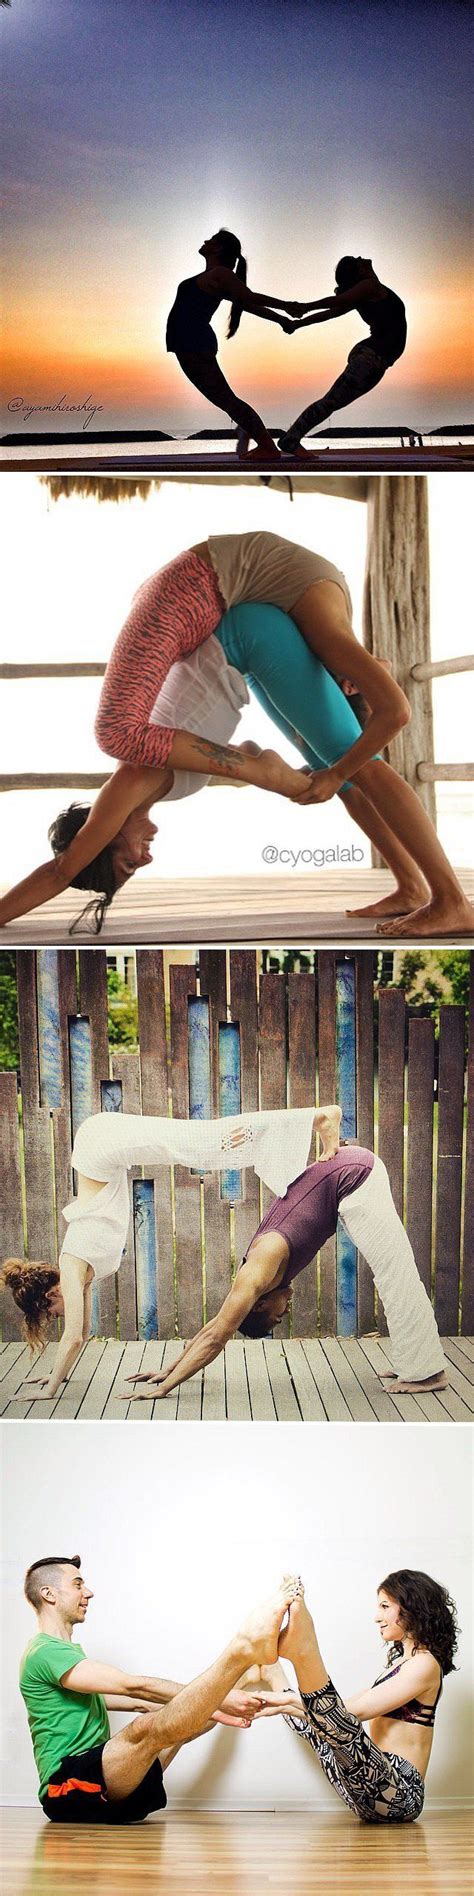 While couples yoga gives us a chance to reconnect with our loved ones, wearing uncomfortable clothing can ruin the experience. Partner Yoga Poses For Friends and Lovers | Partner yoga poses, Partner yoga, Couples yoga